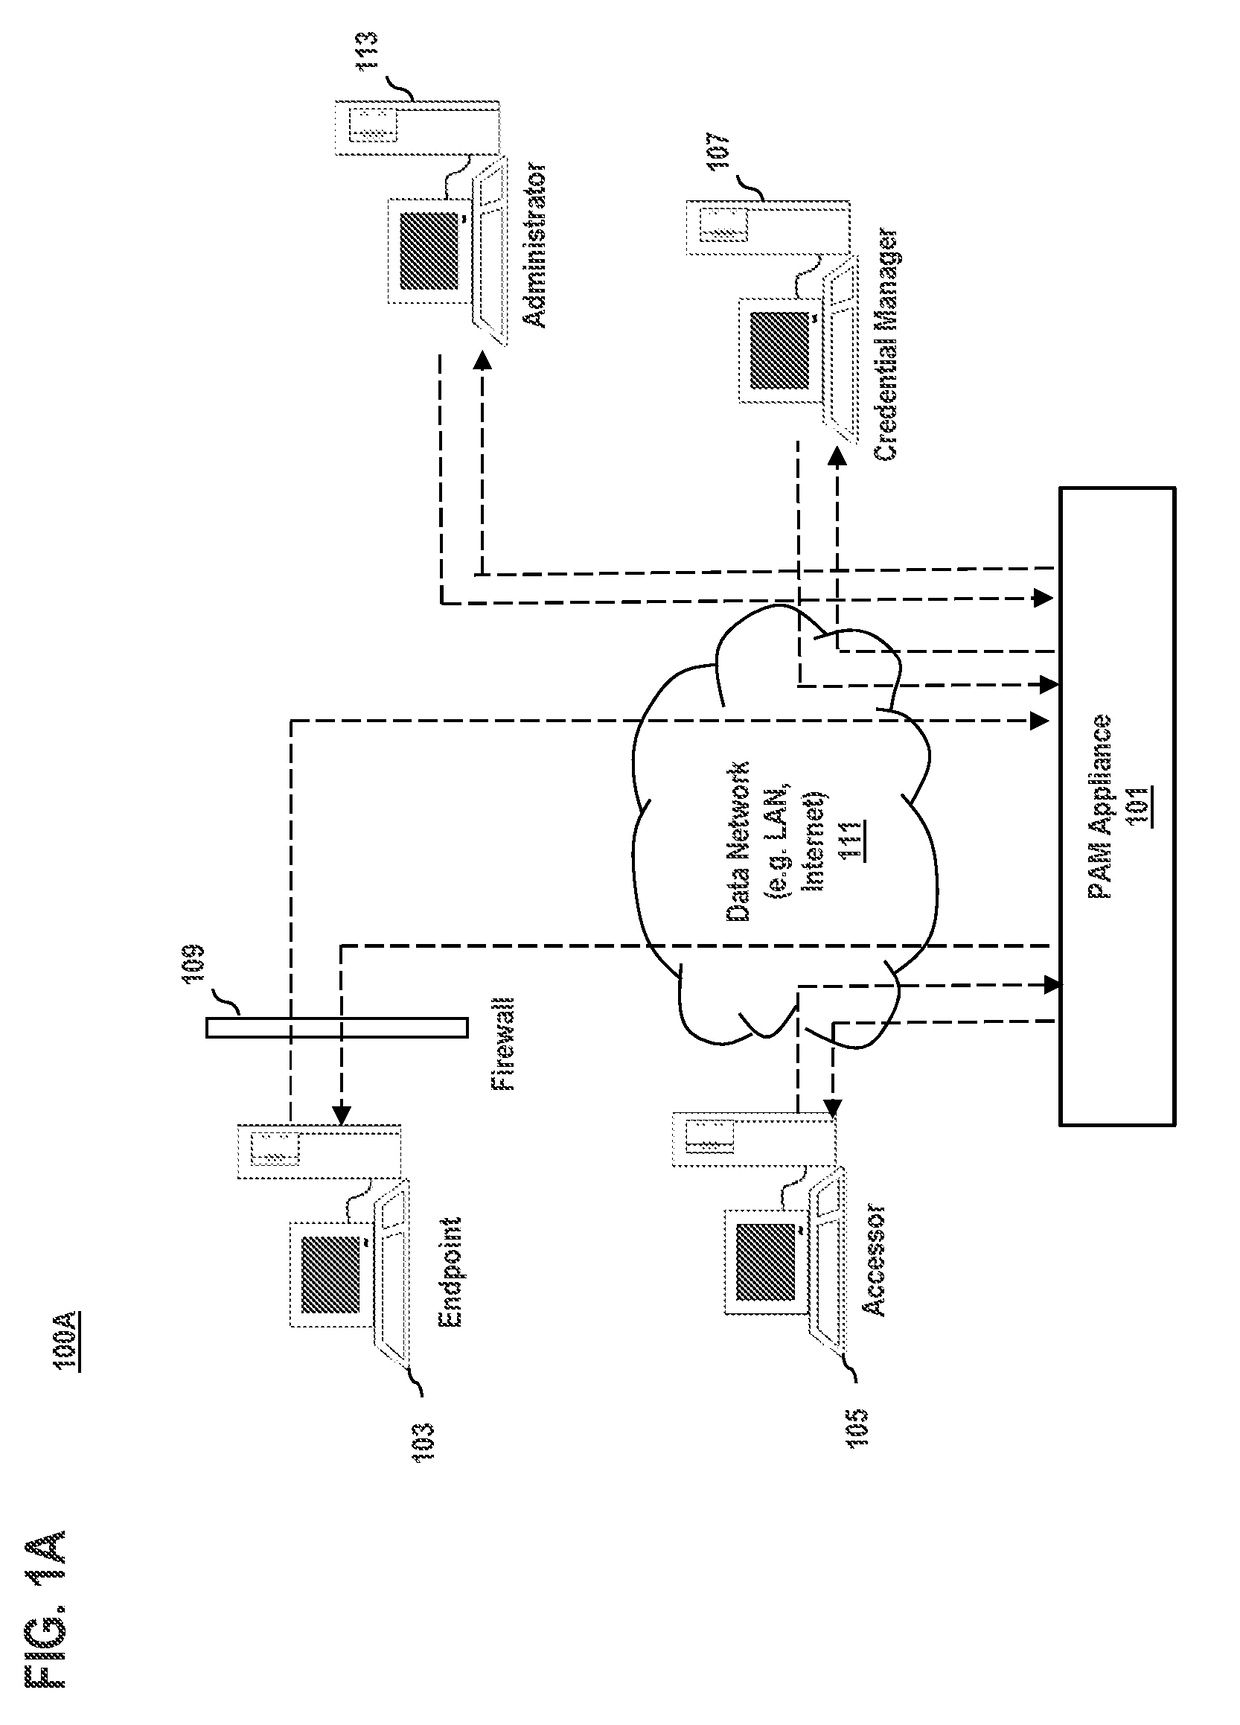 Systems, methods, and apparatuses for credential handling